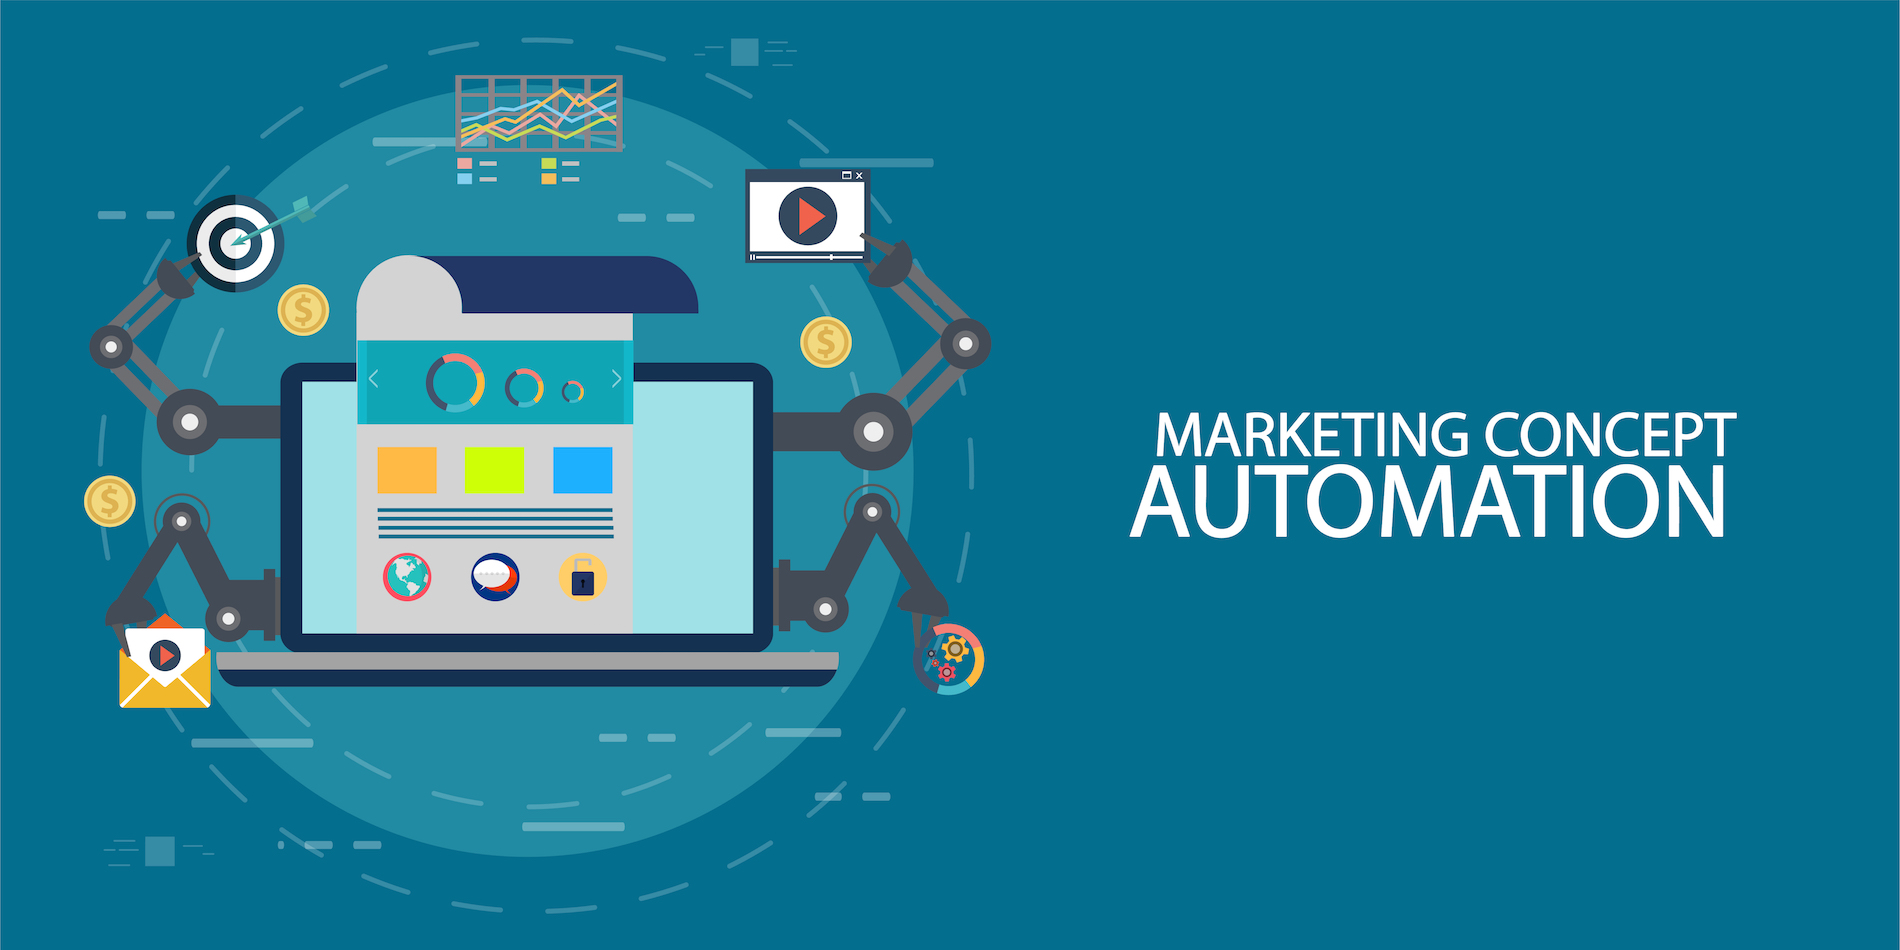 Why is SEO Necessary for a Marketing Automation Strategy